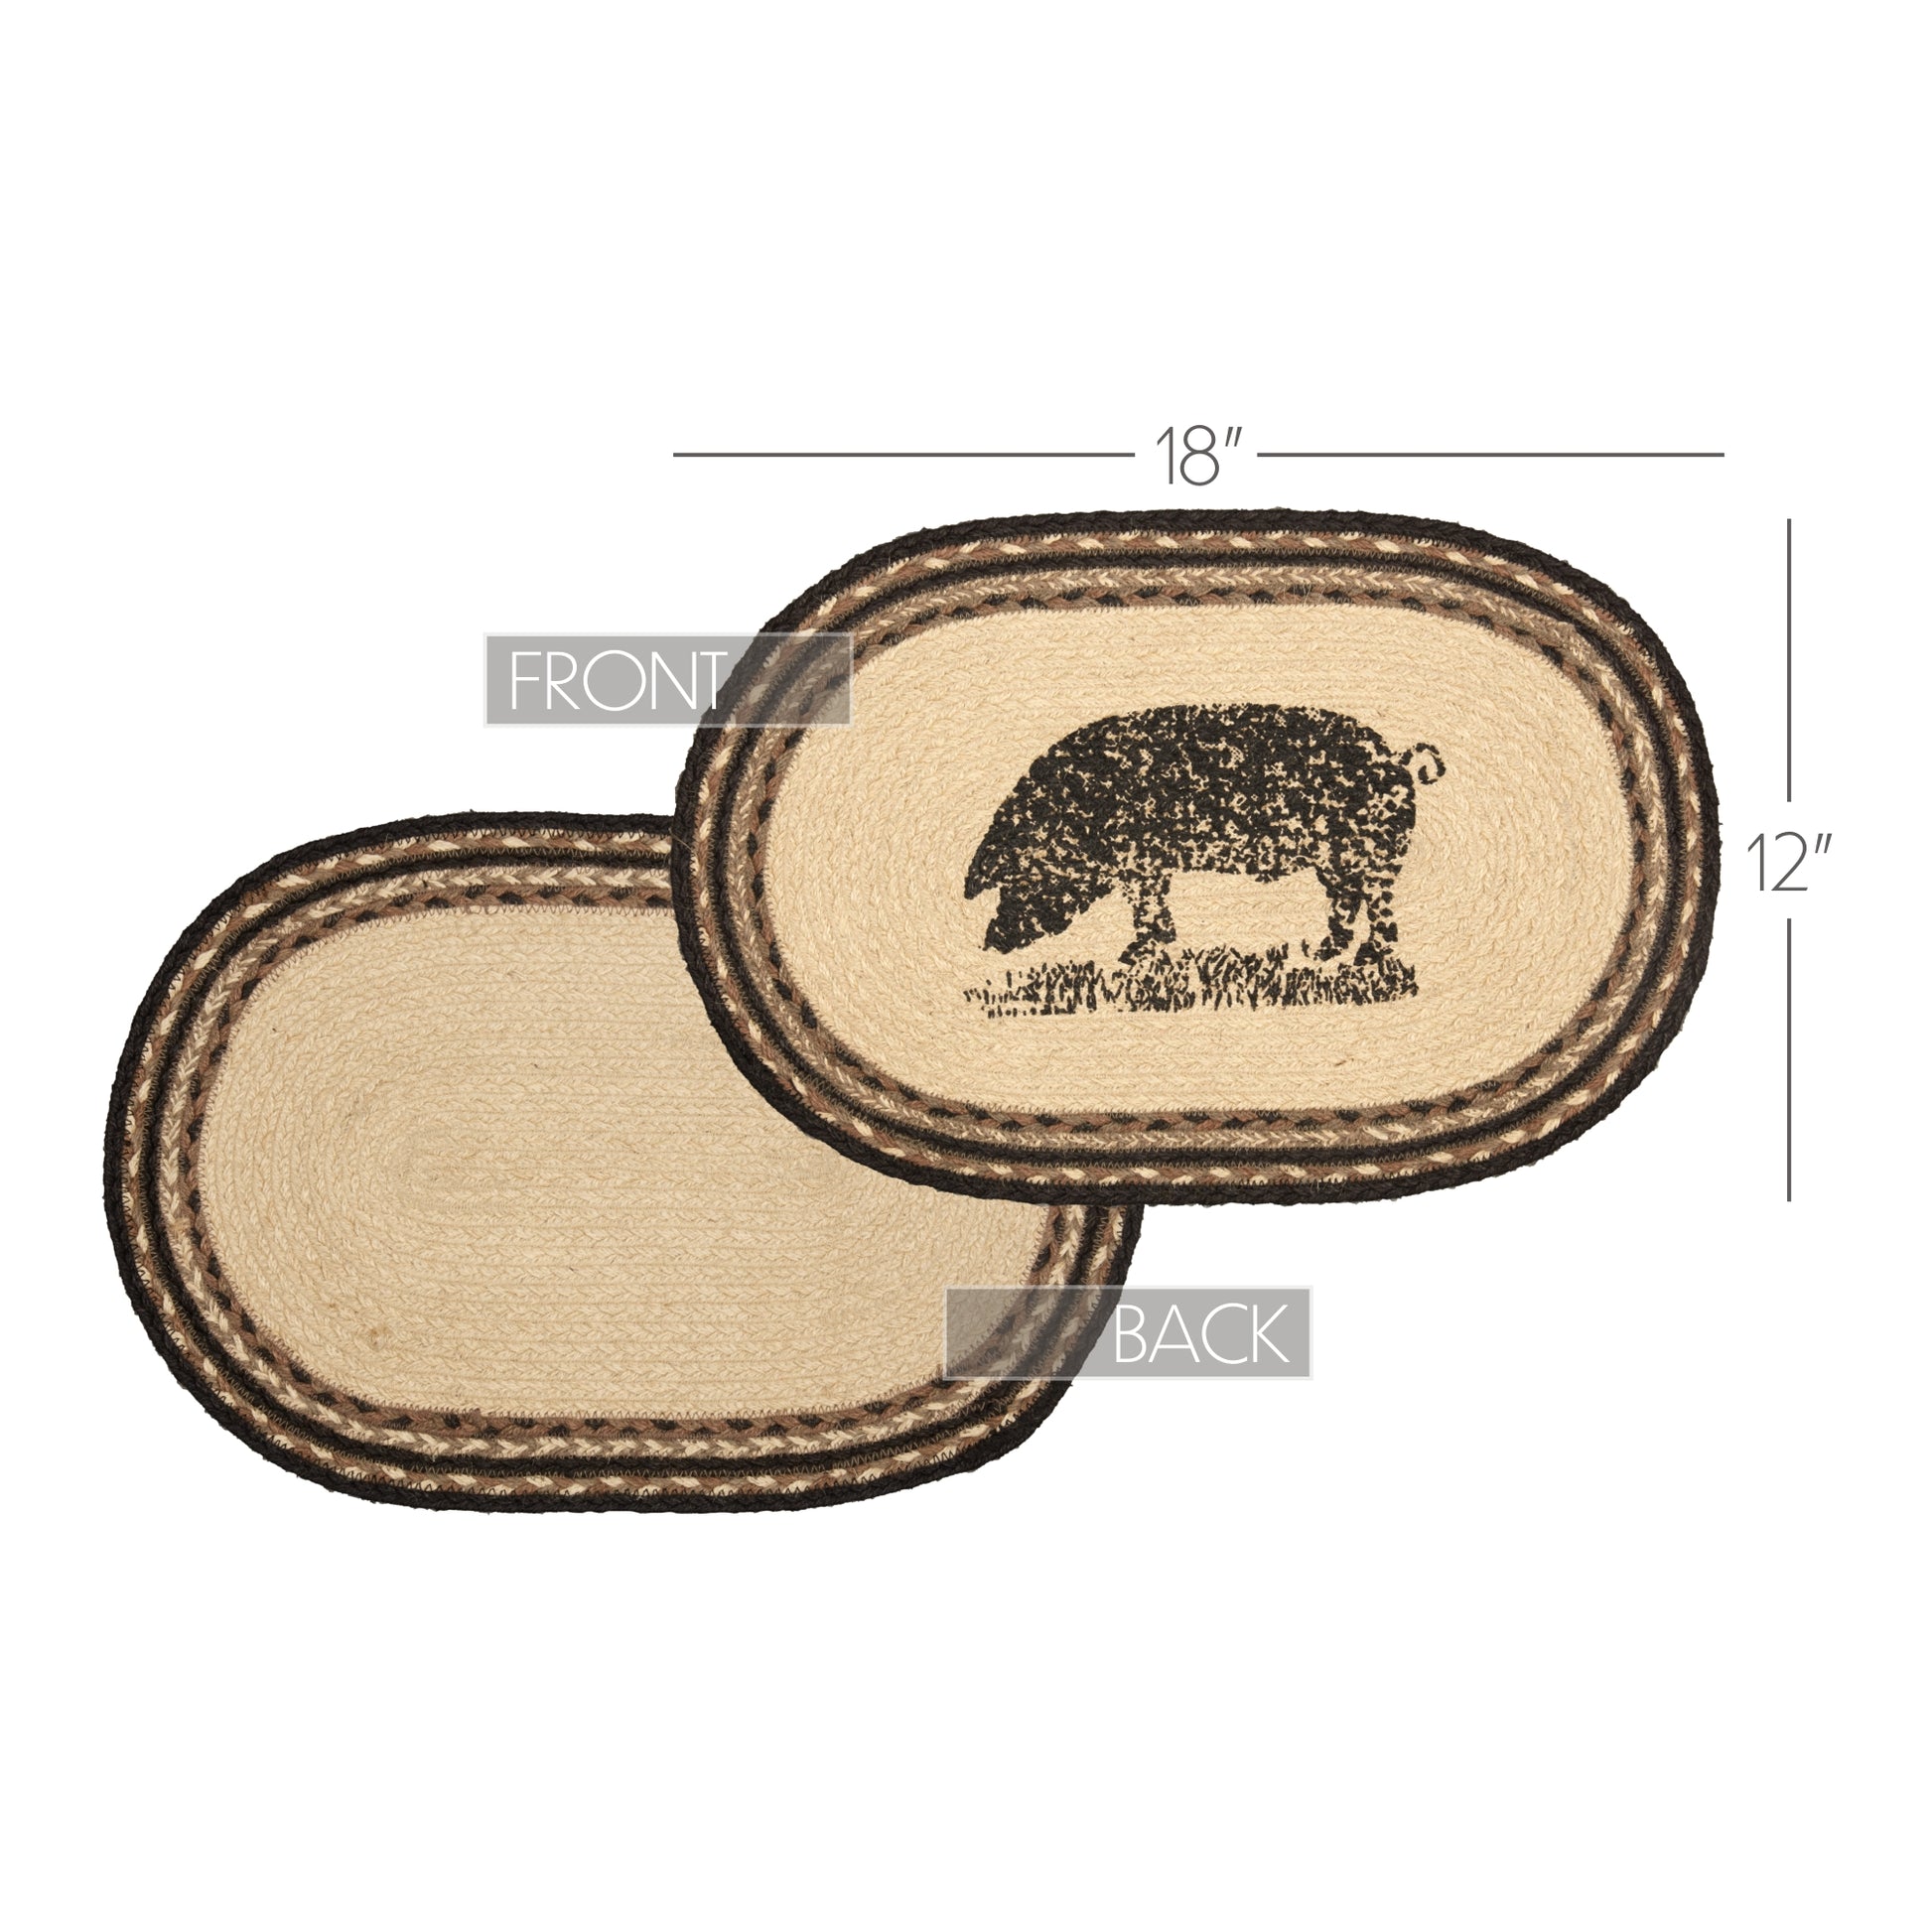 Burlap Embroidery Kit for beginners - Portuguese animals